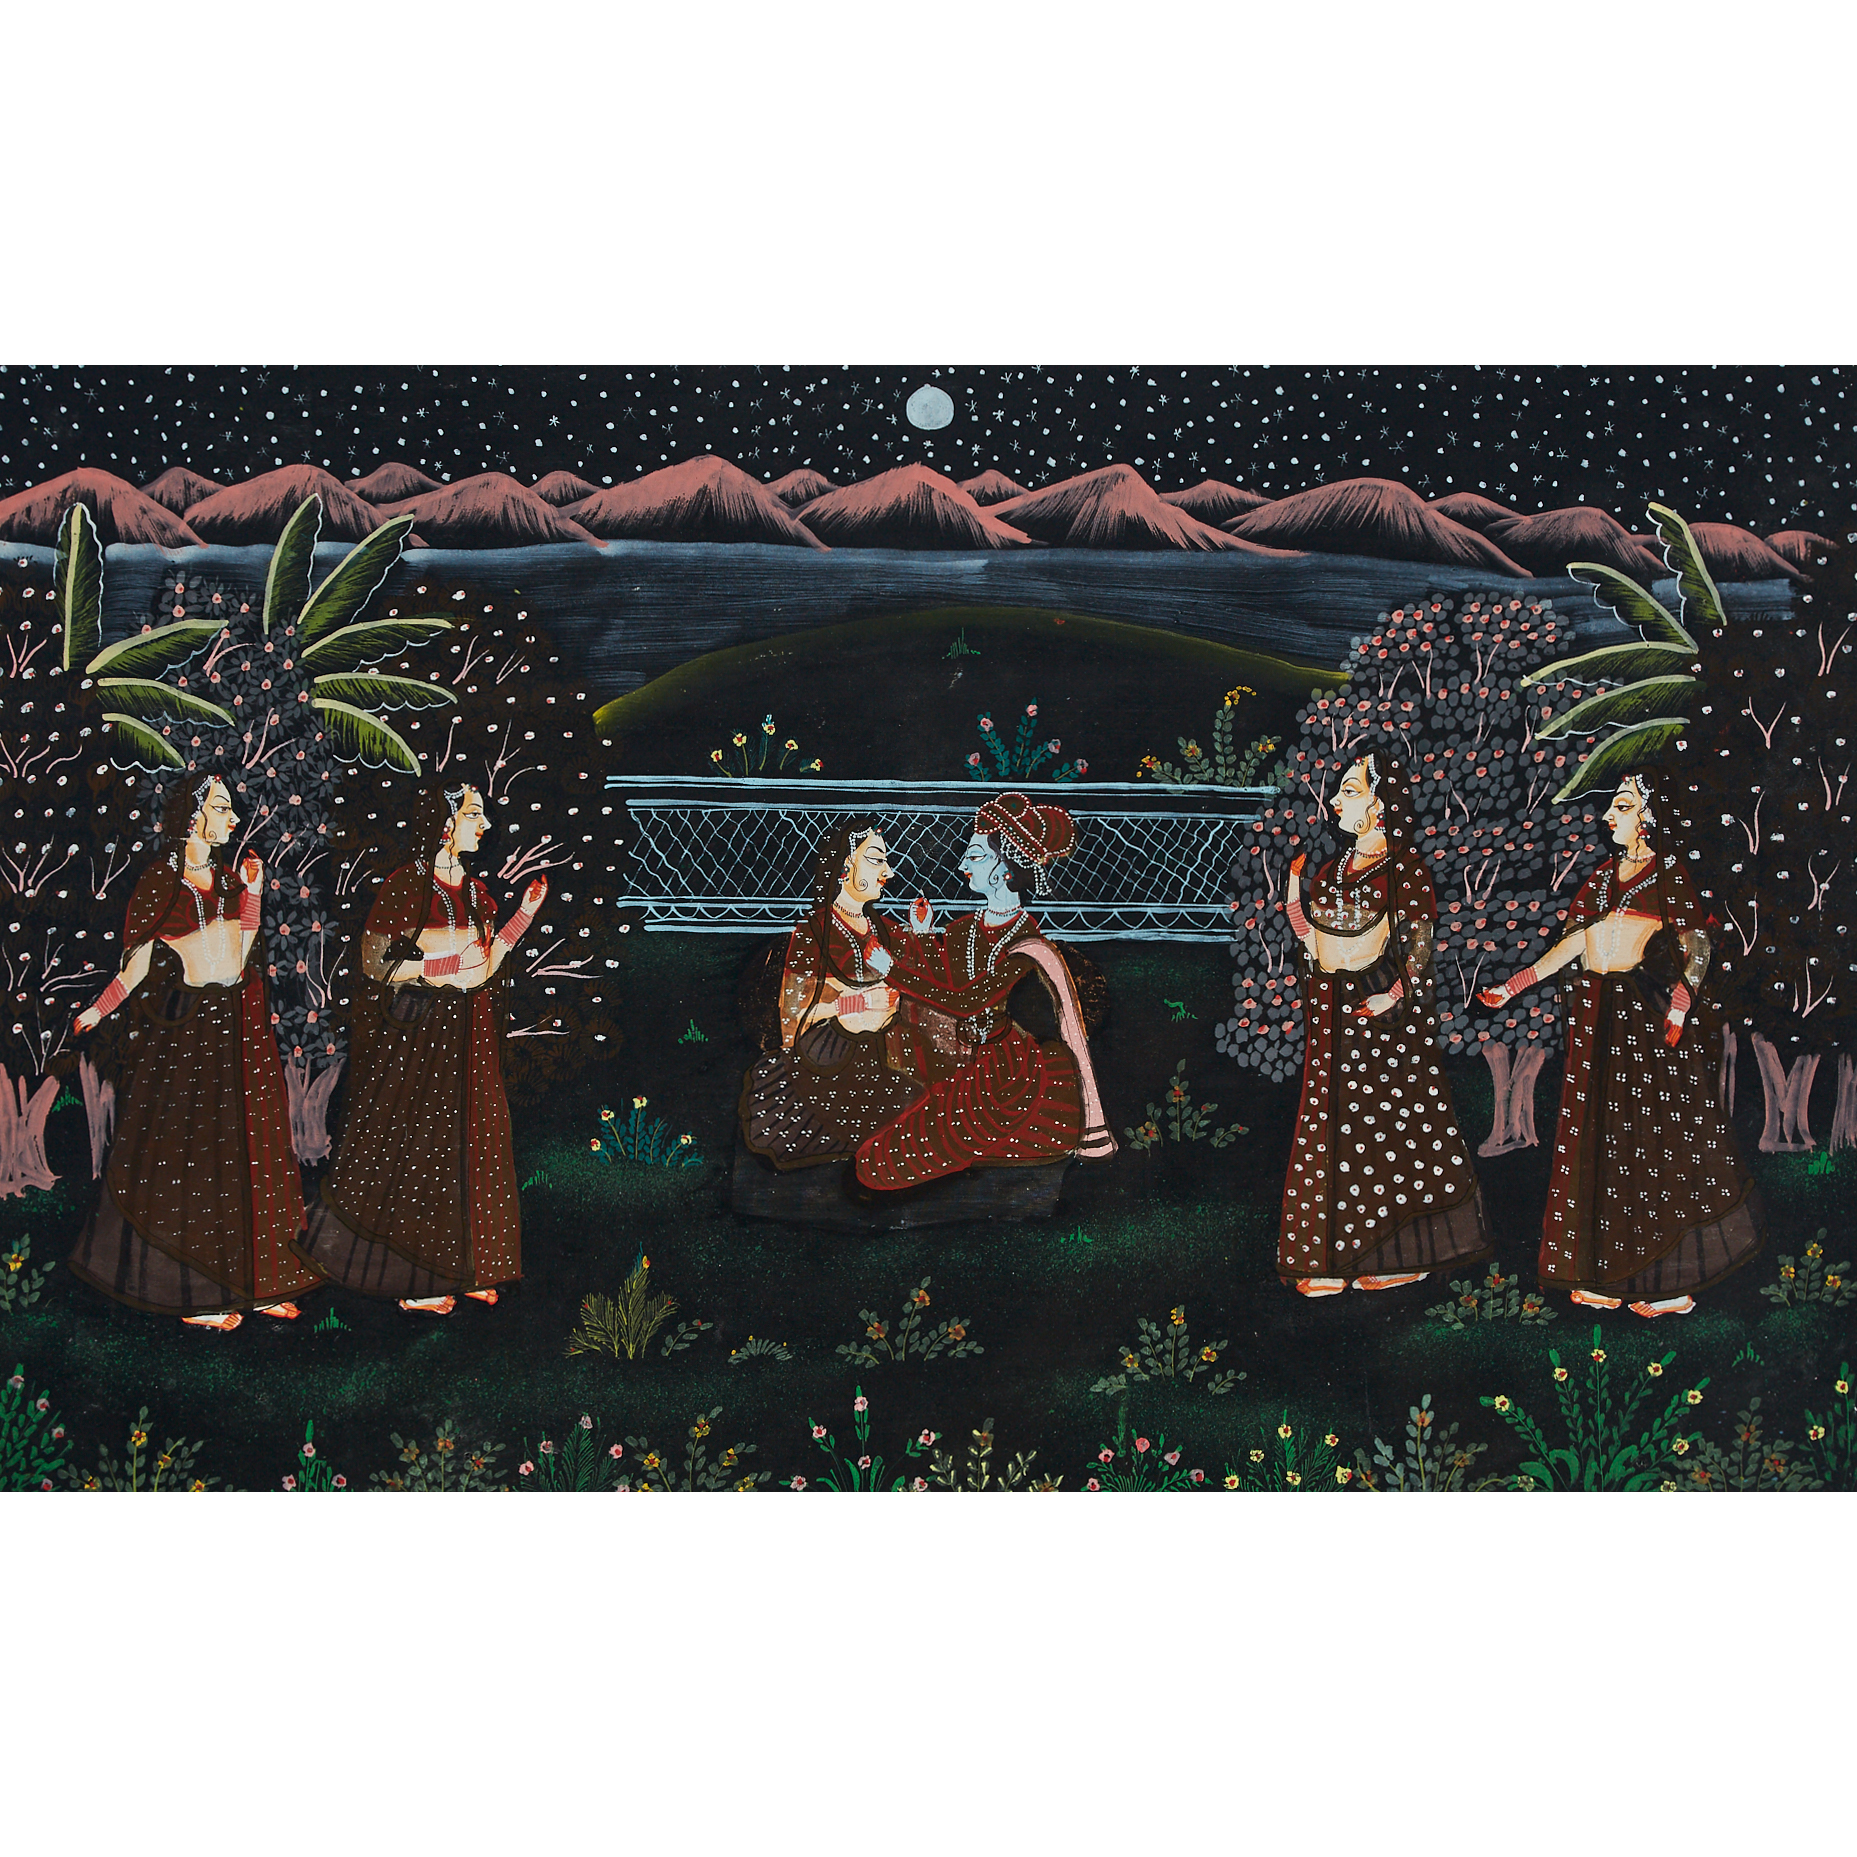 A Painting of Krishna and Gopis